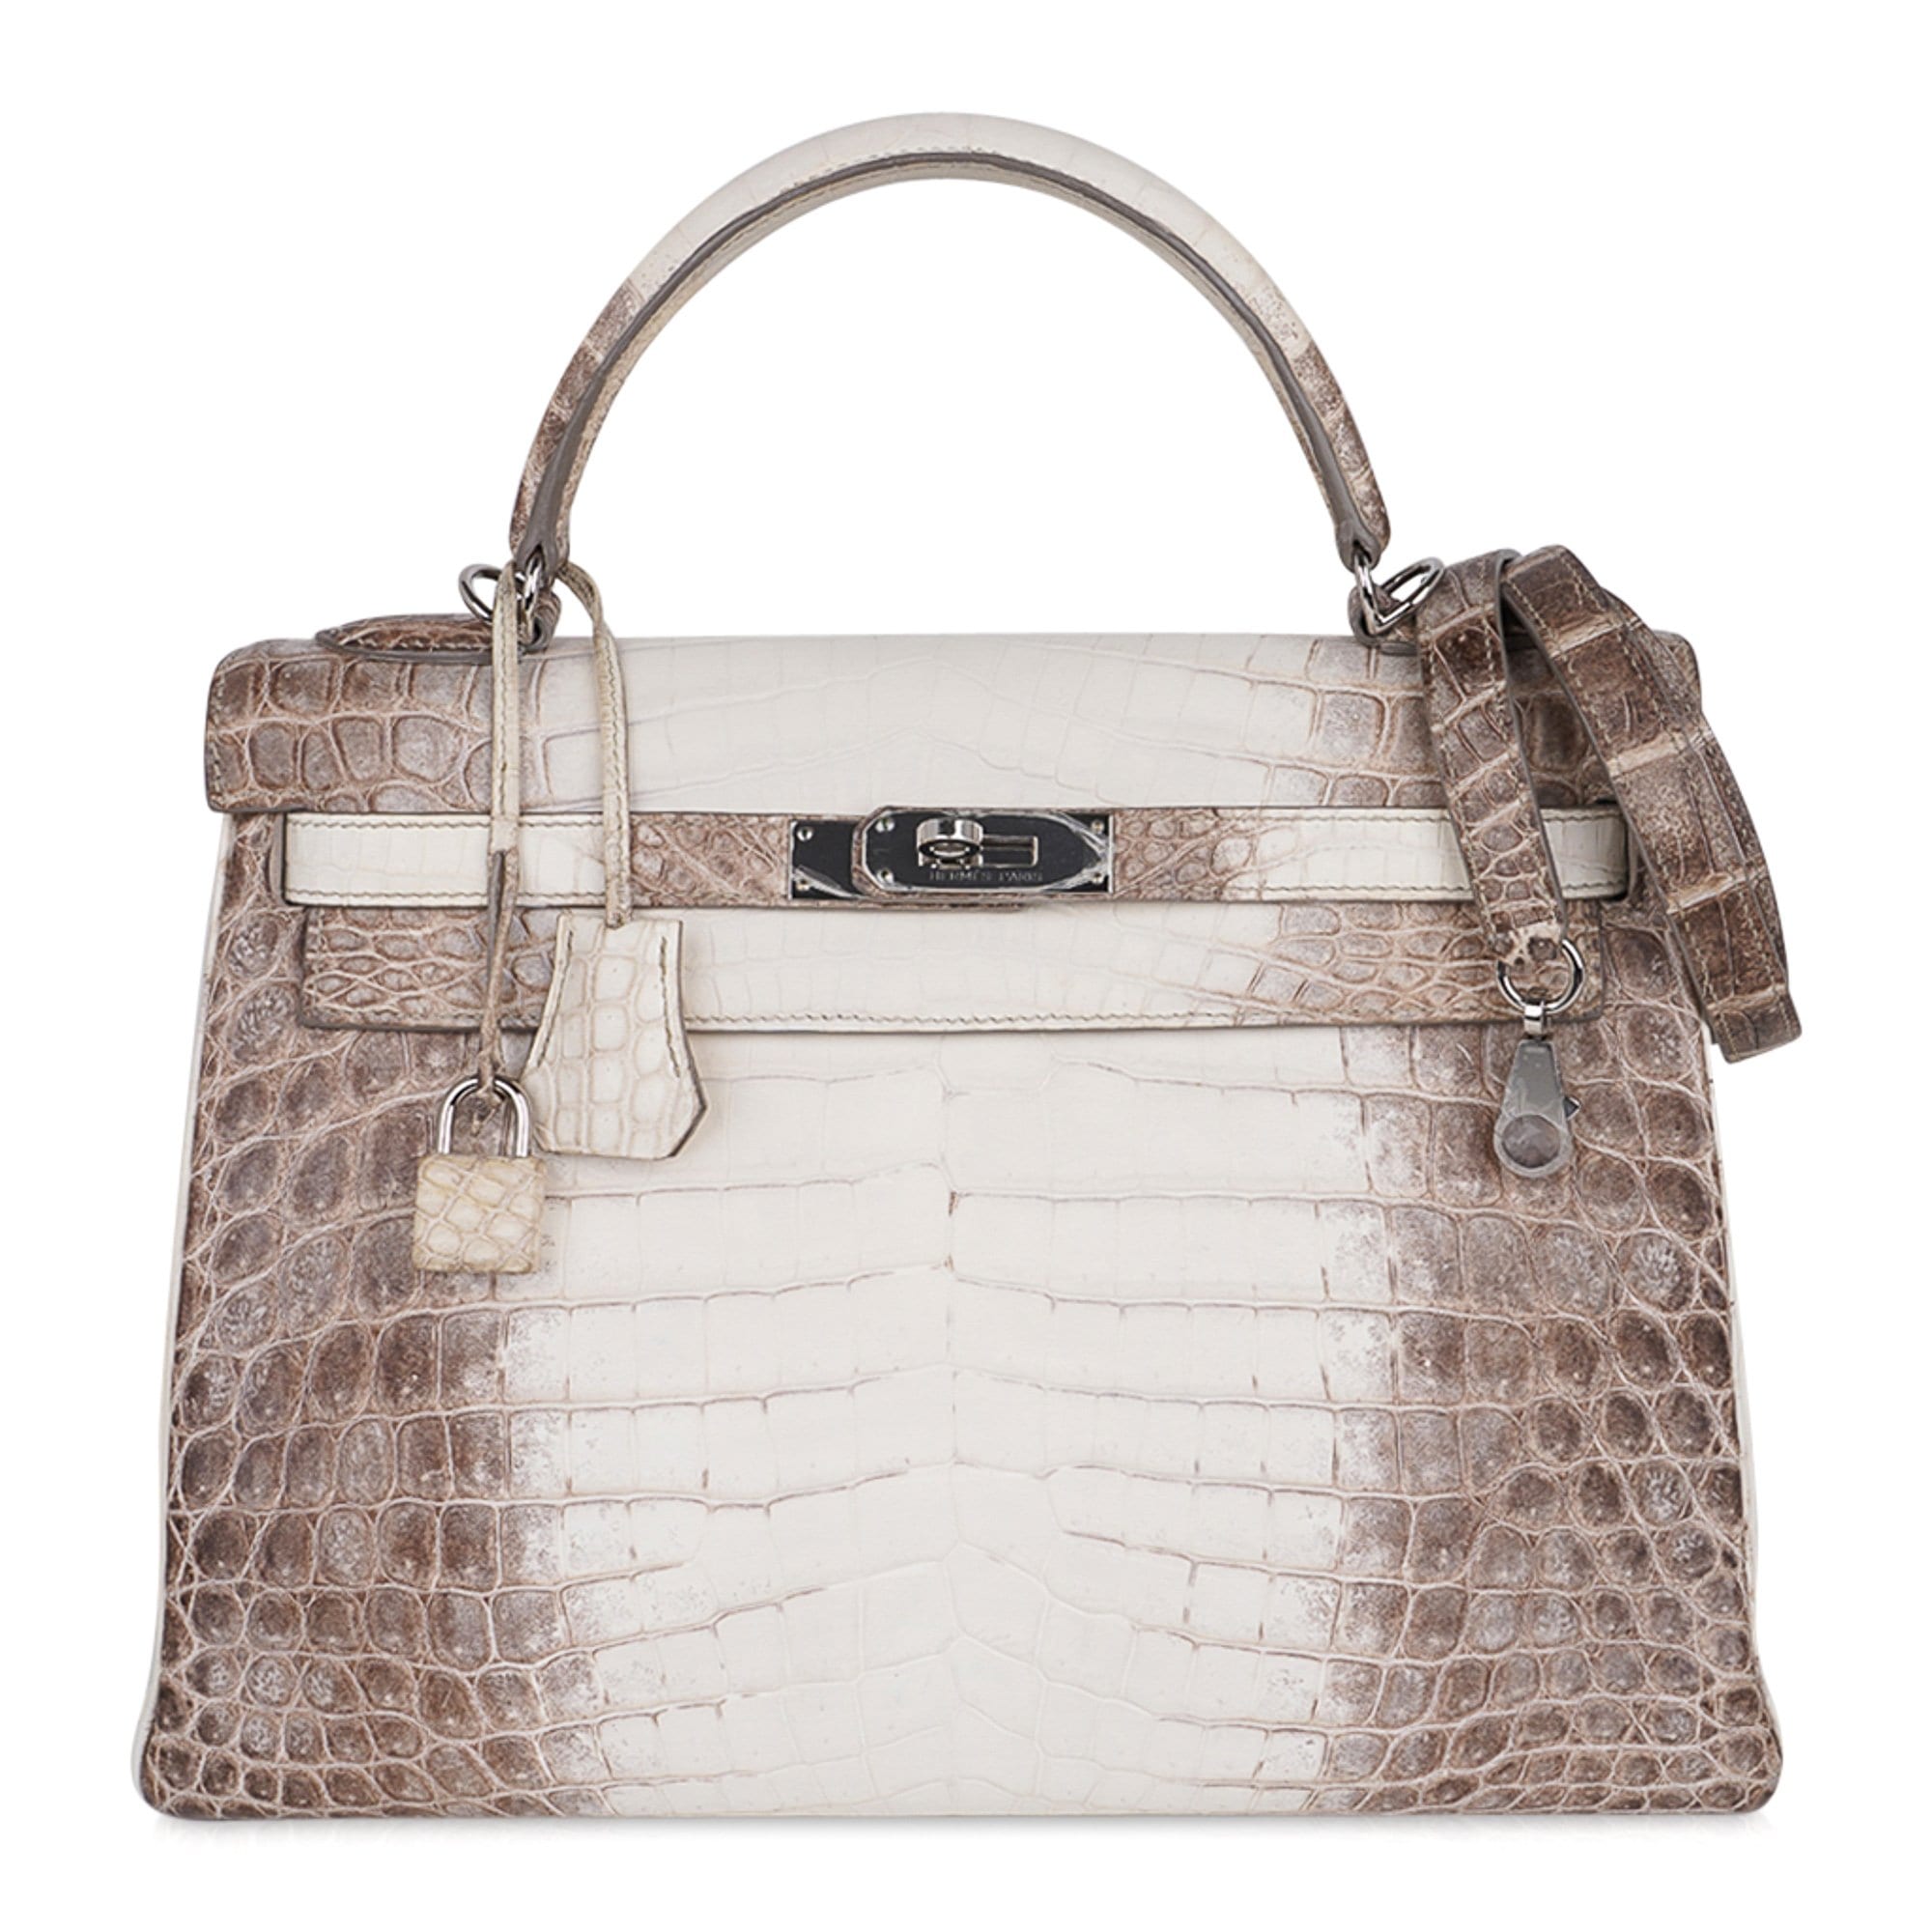 Hermes Limited Edition Birkin 35 Bag Faubourg Tropical Toile & Swift